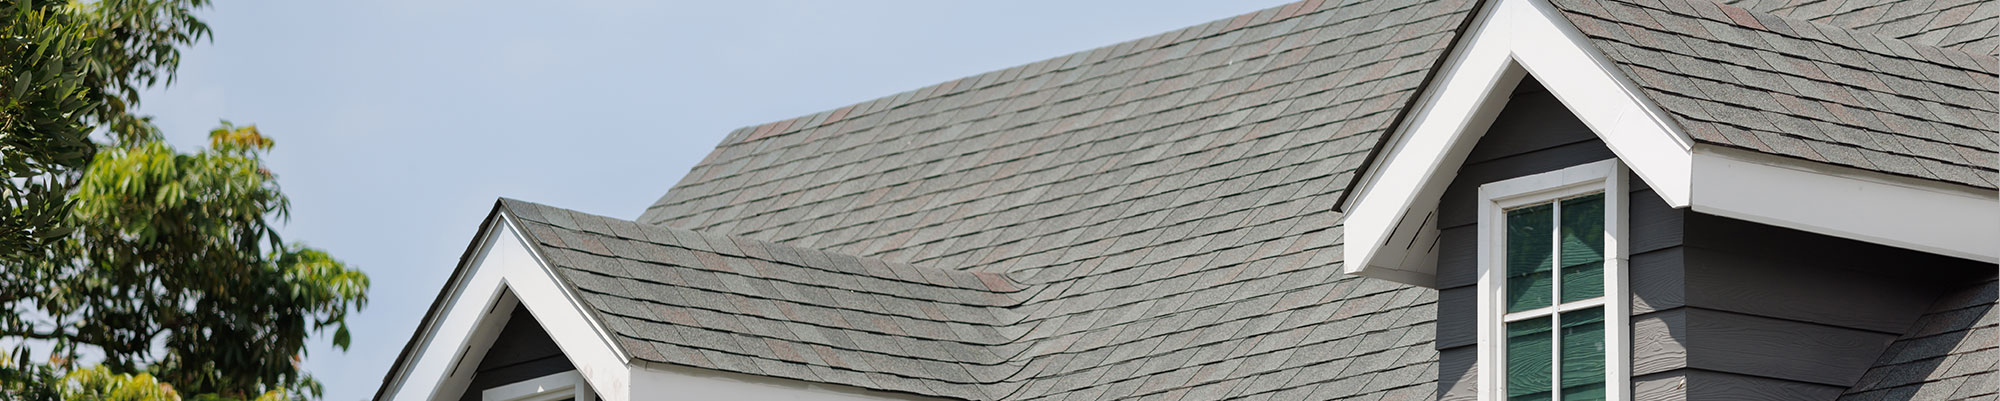 Hales Corners roof replacement company